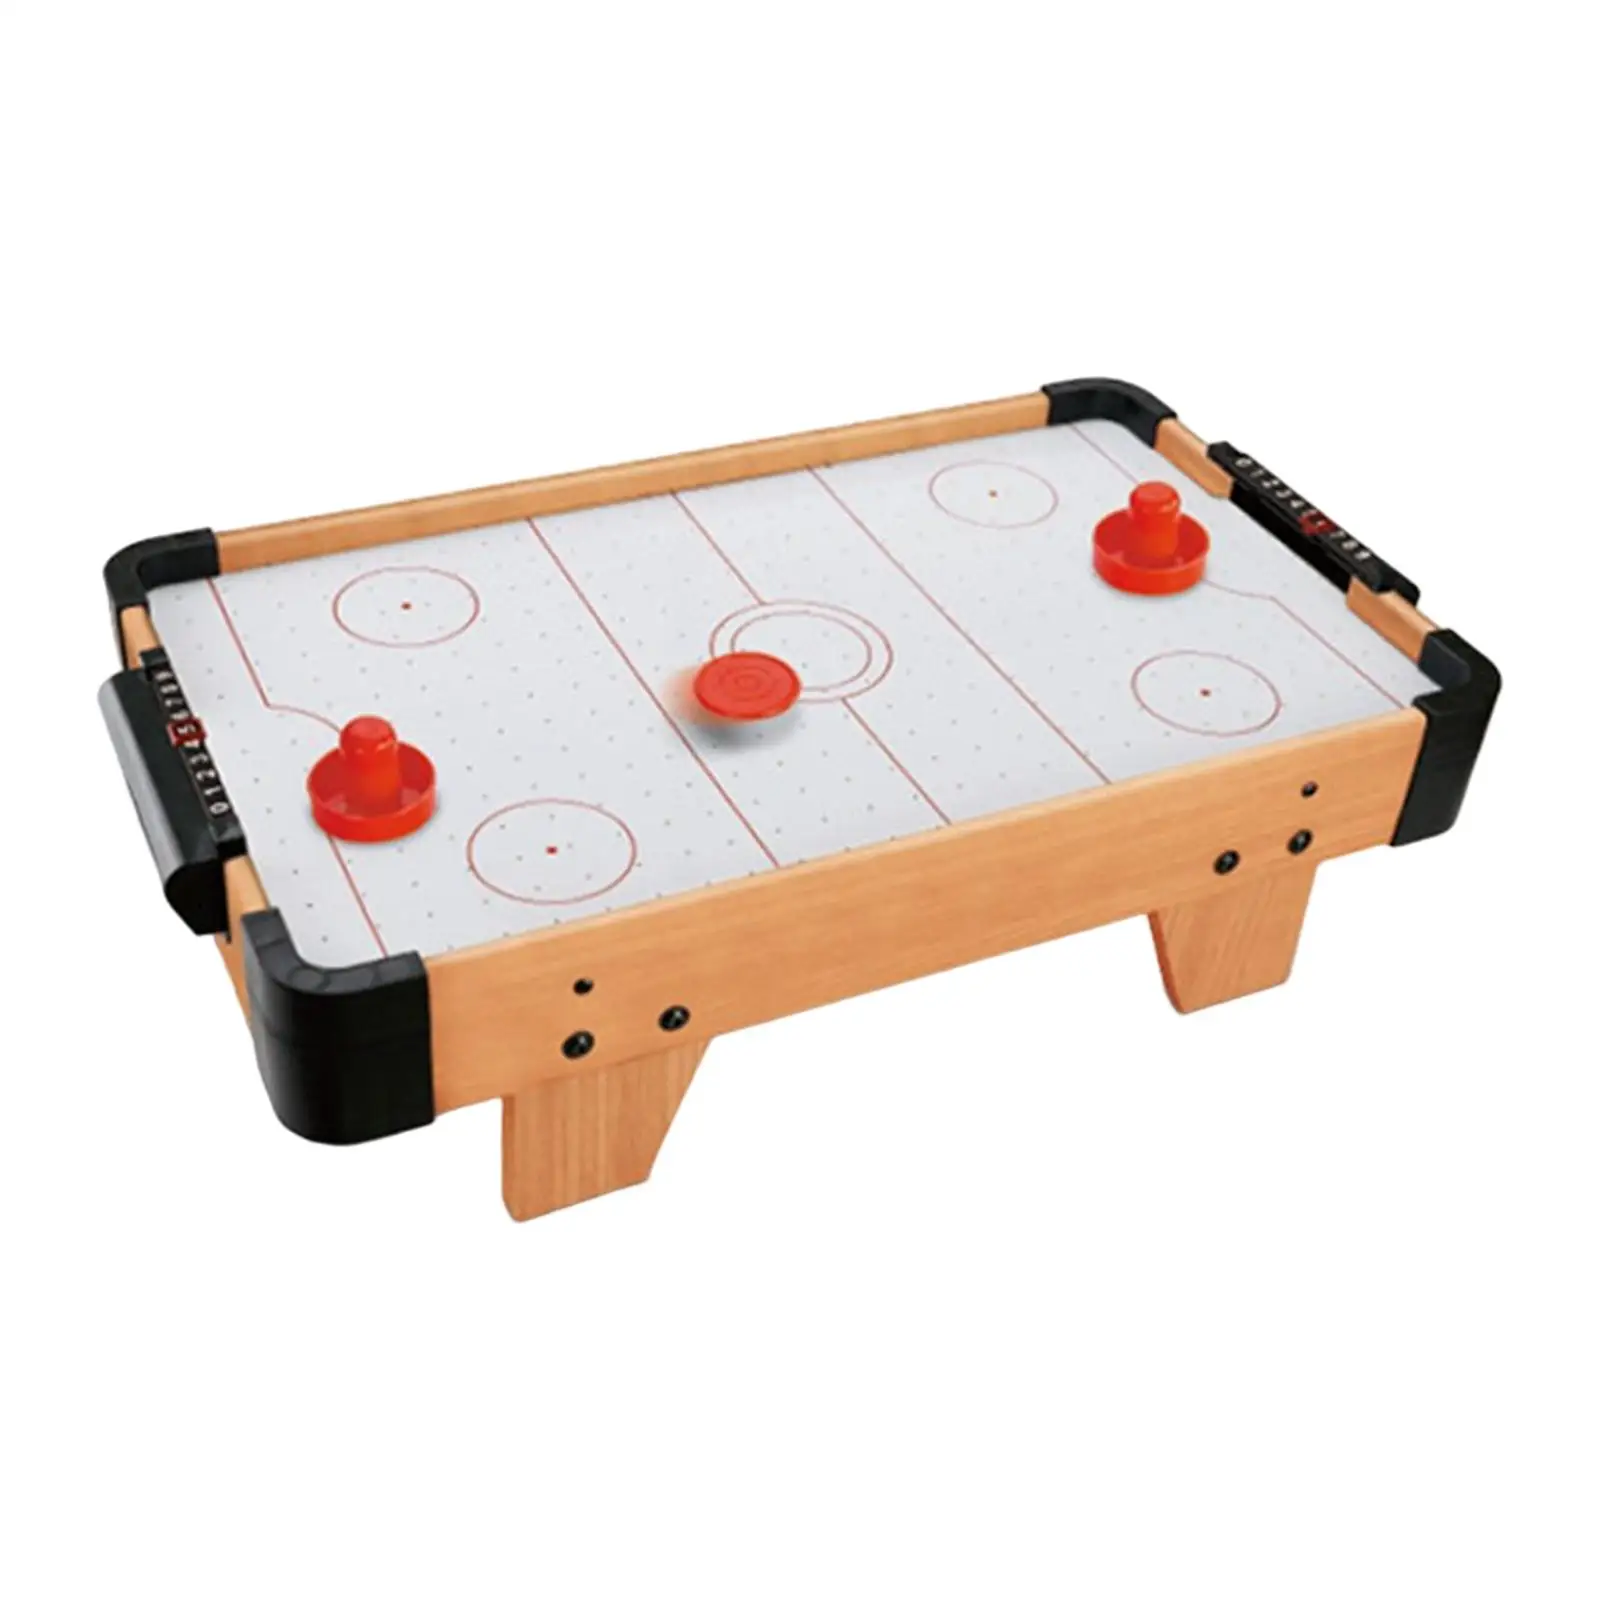 Mini Air Hockey Table Battle Game Family Party with Sliders and Pucks Parent Child Interactive for Toddler Adults Children